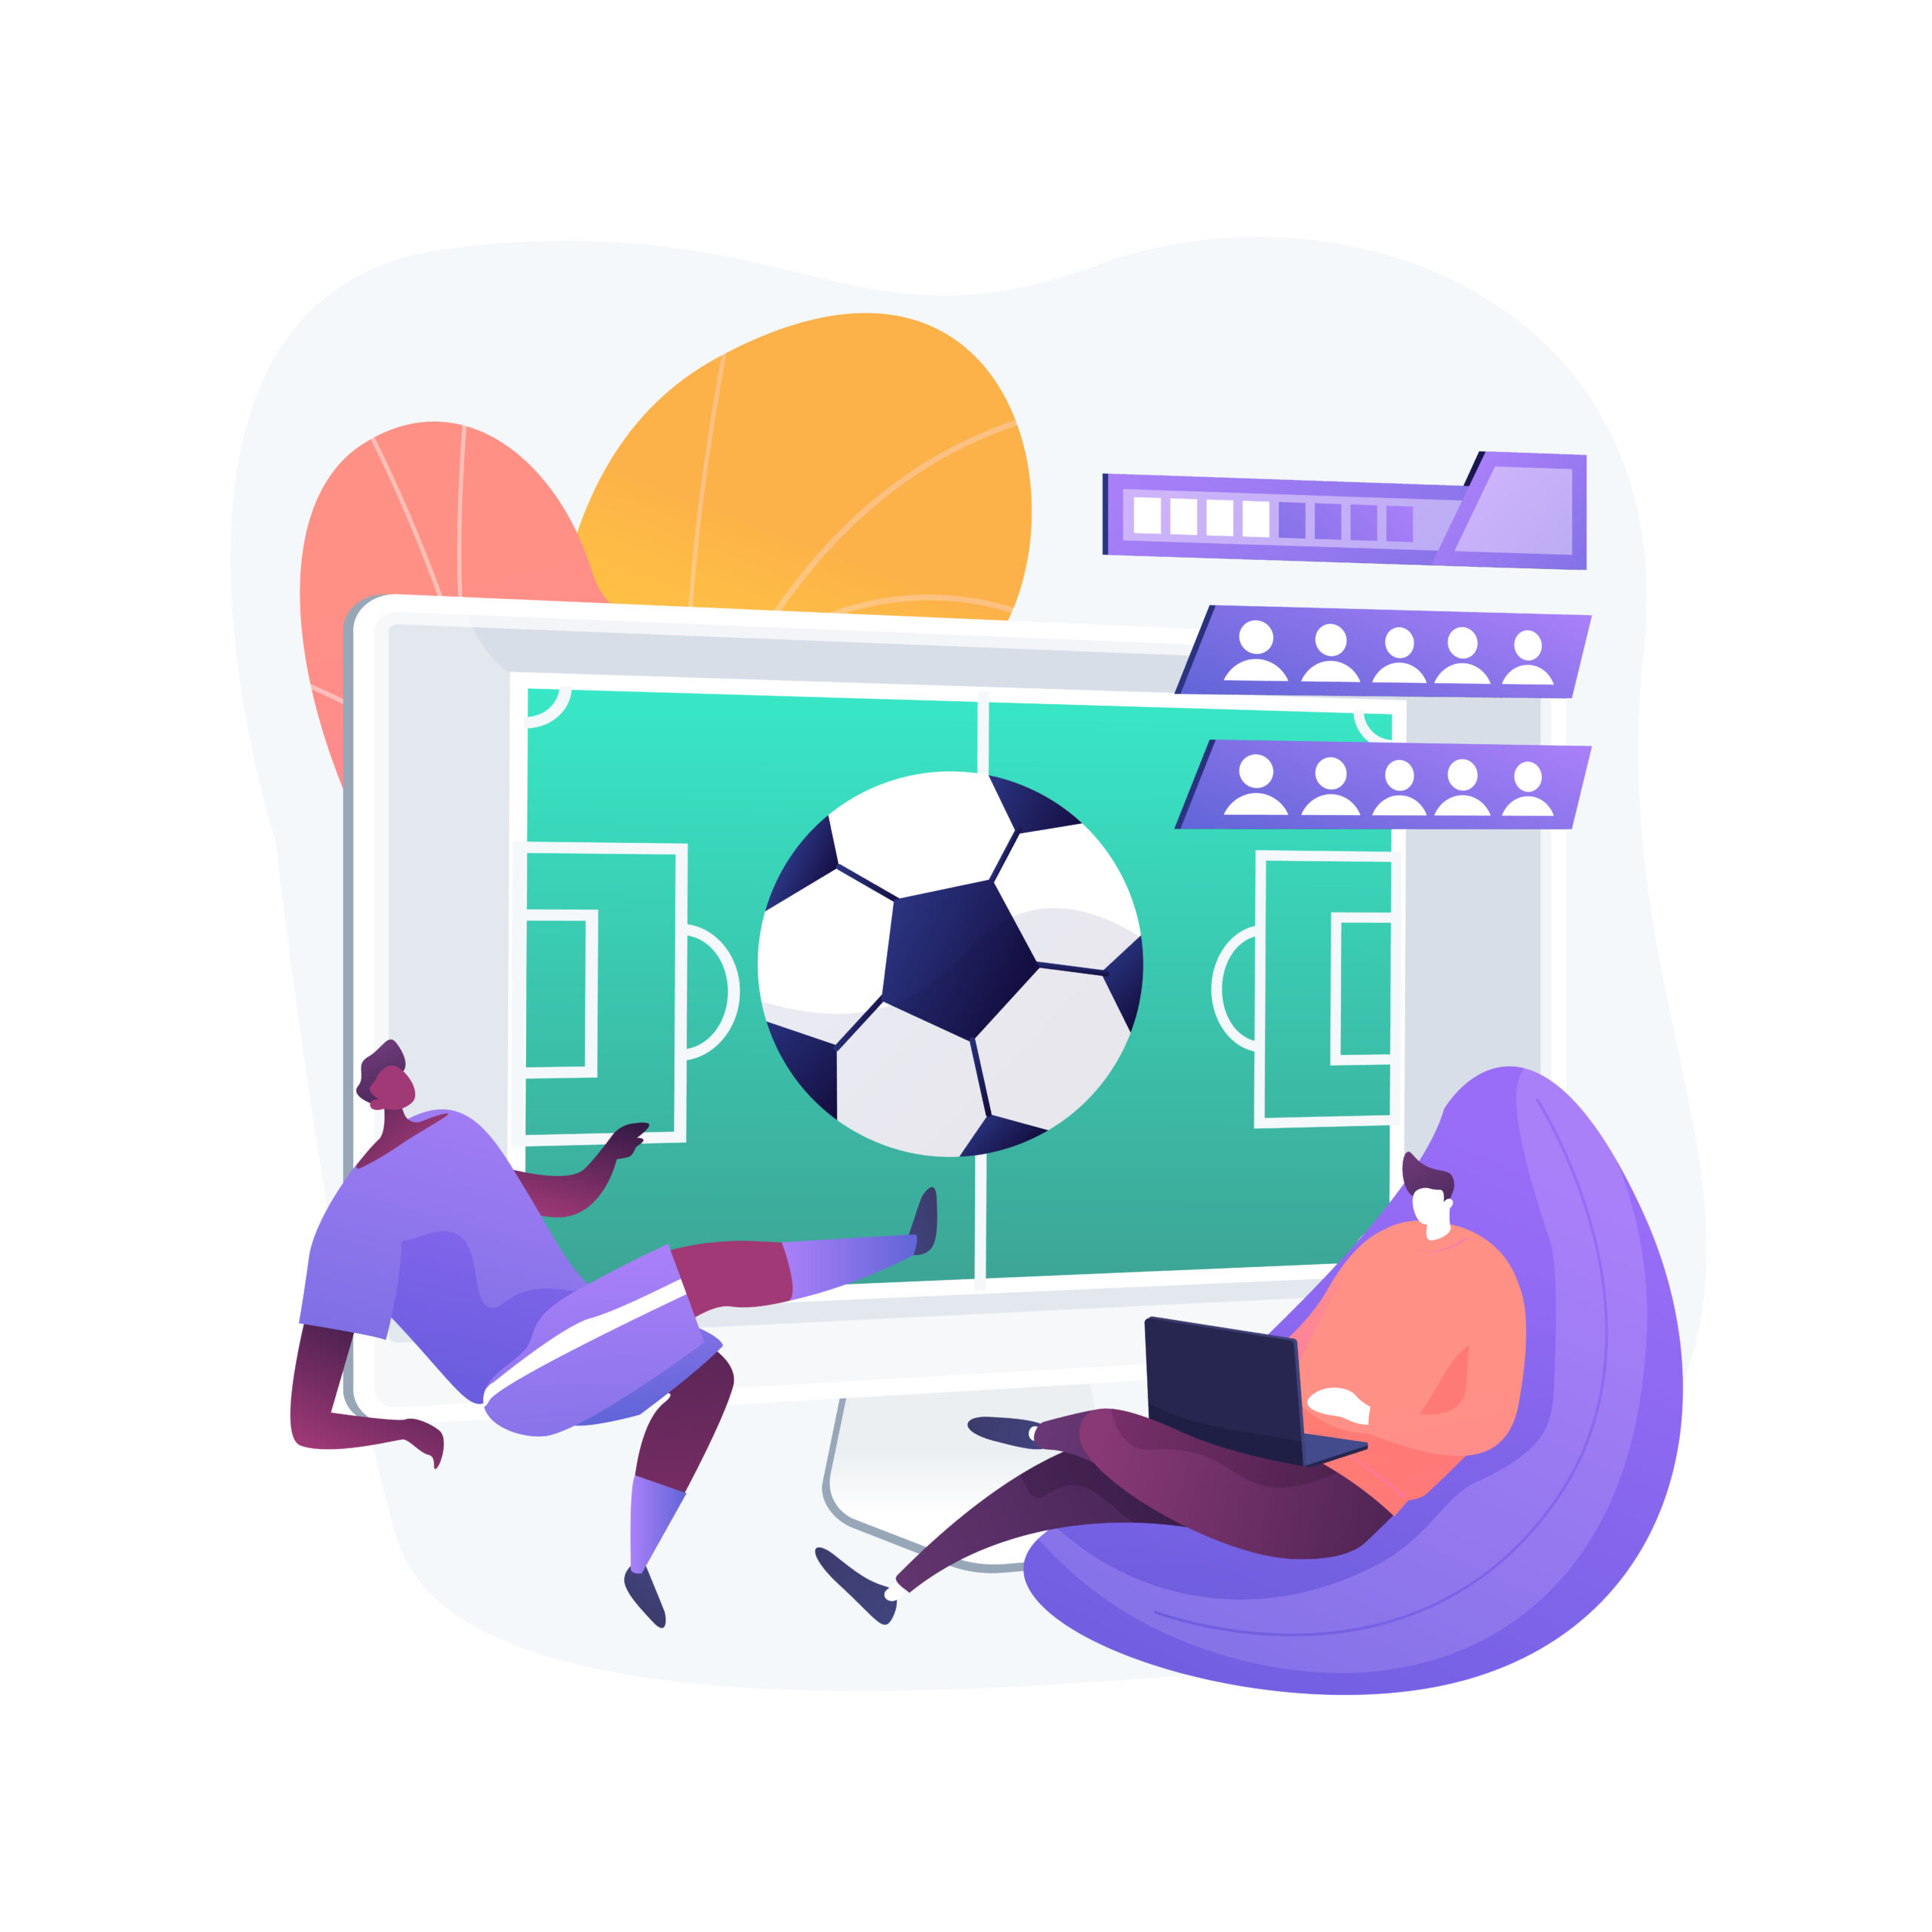 Sports Betting App Development Steps, Costs, Technology Stack, and More